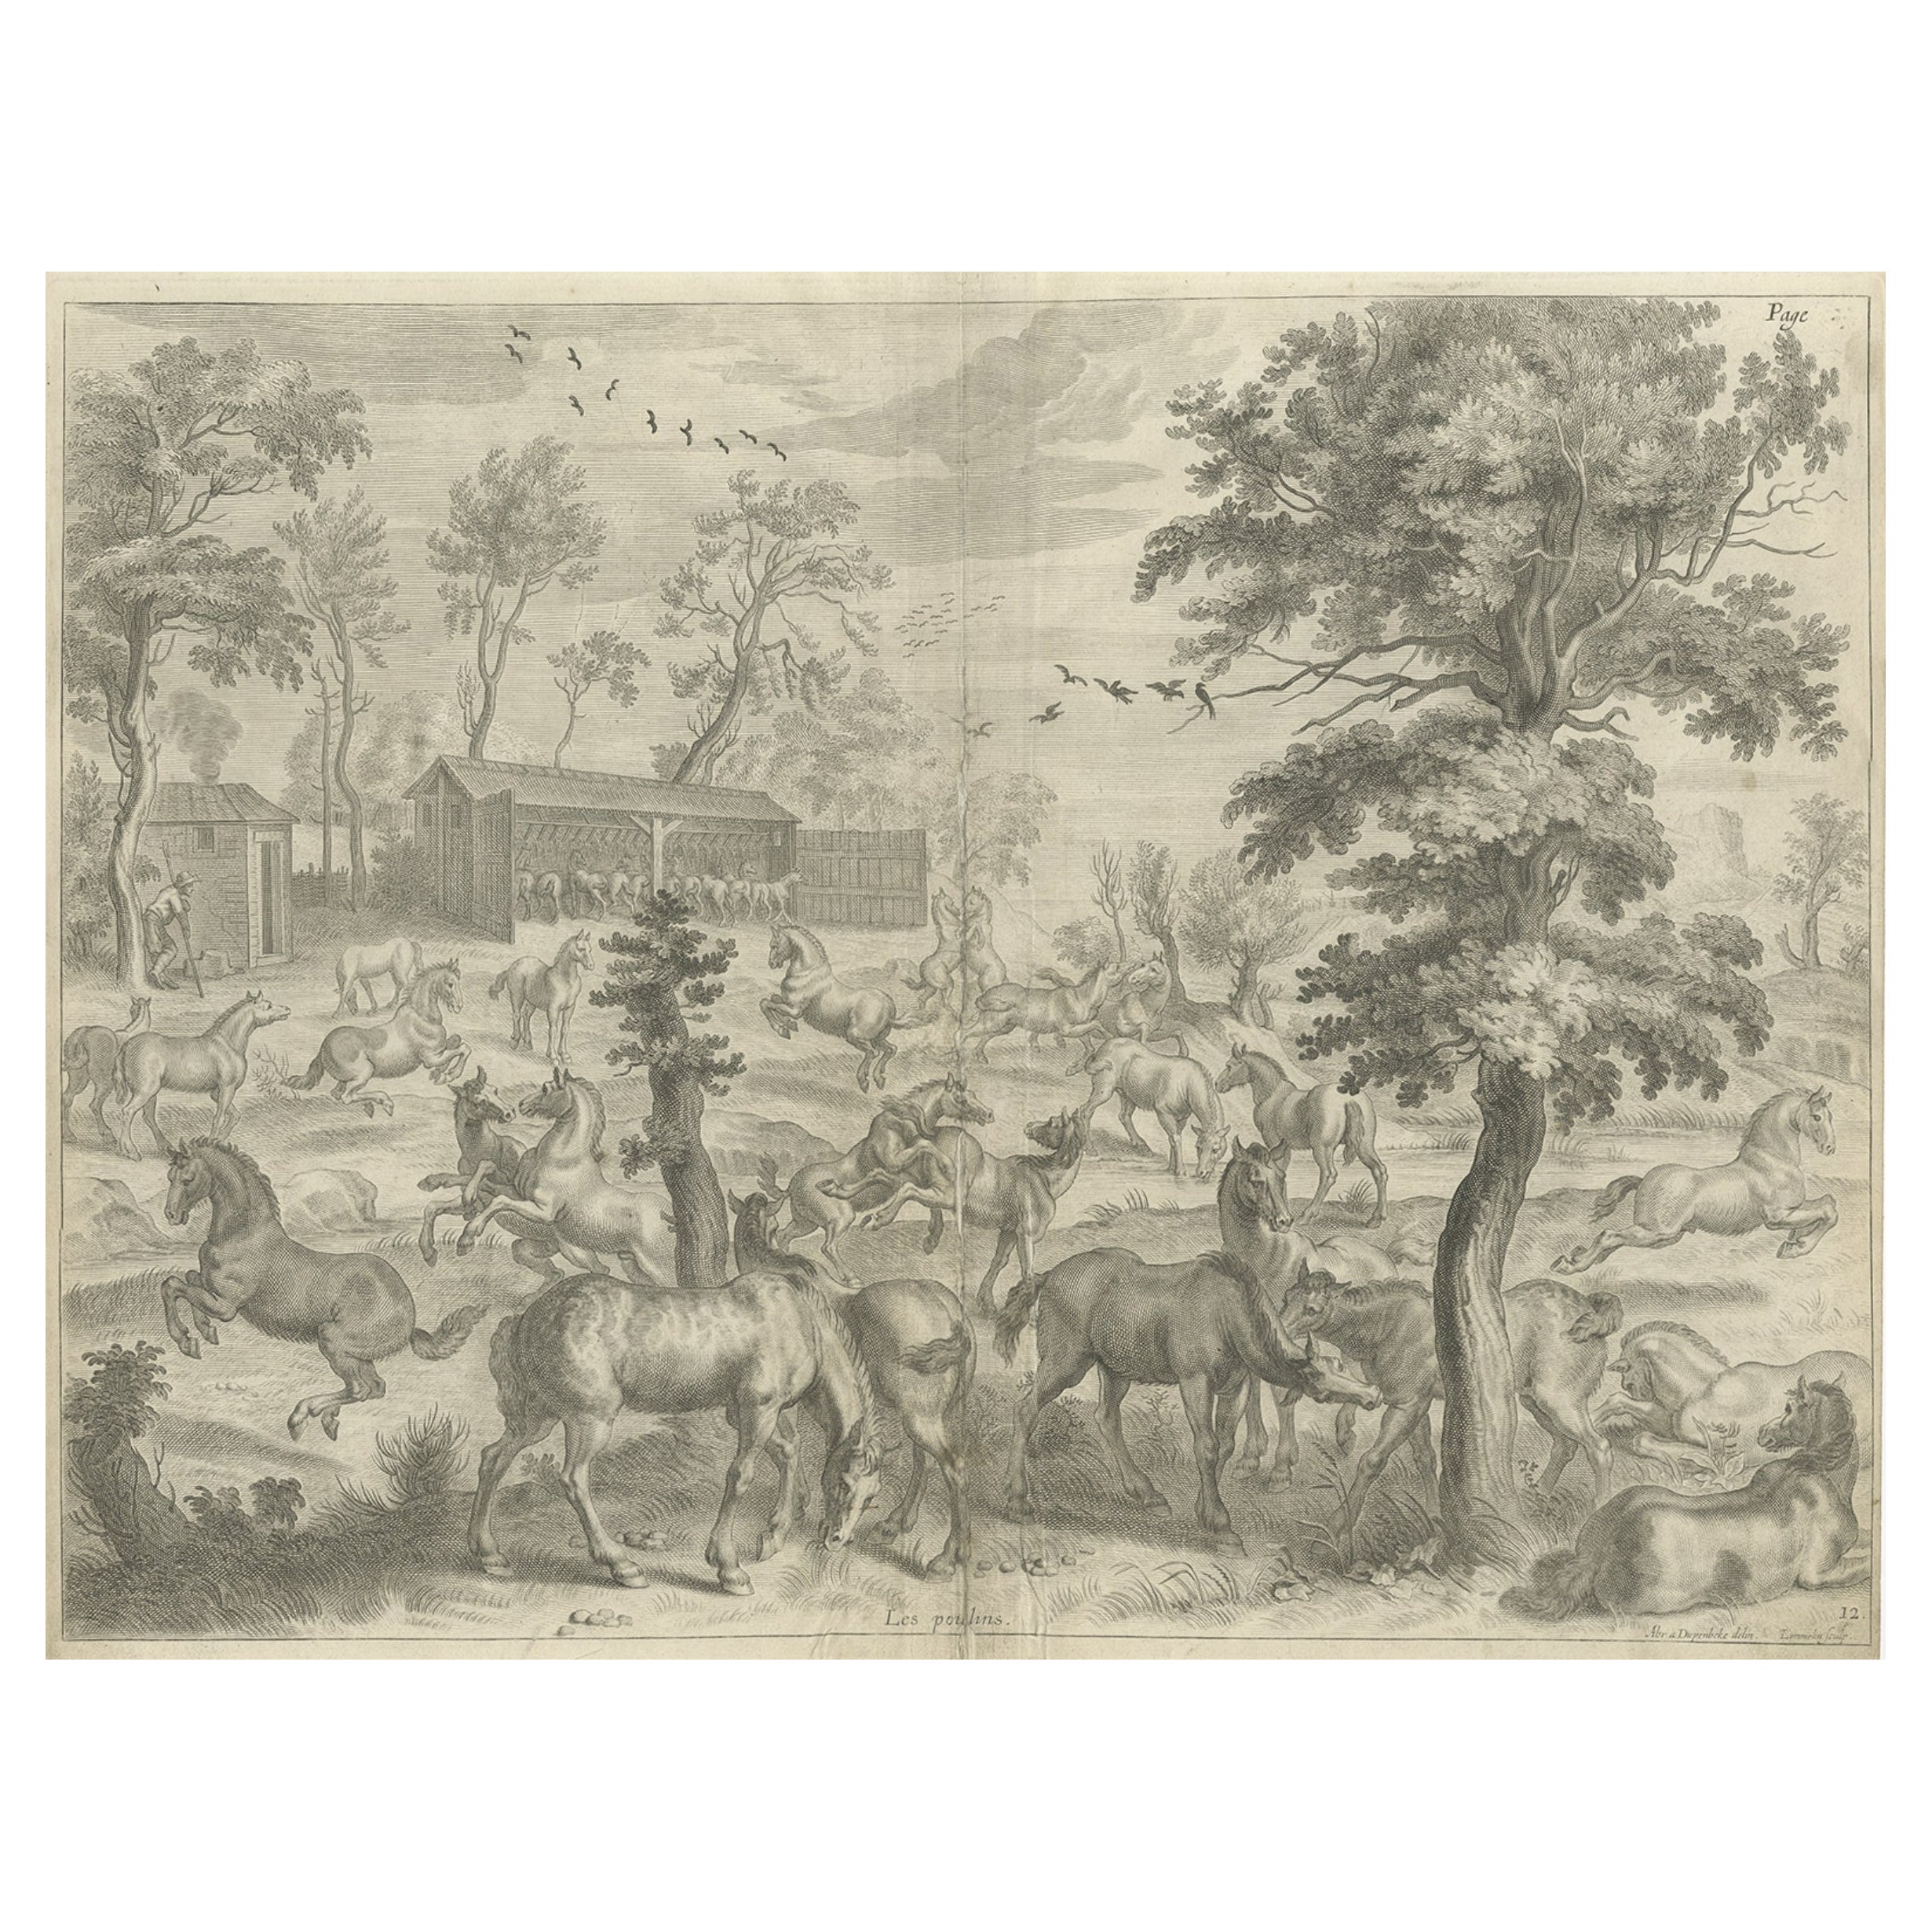 Old and Interesting Rare Print of a Study of Horses, ca.1665